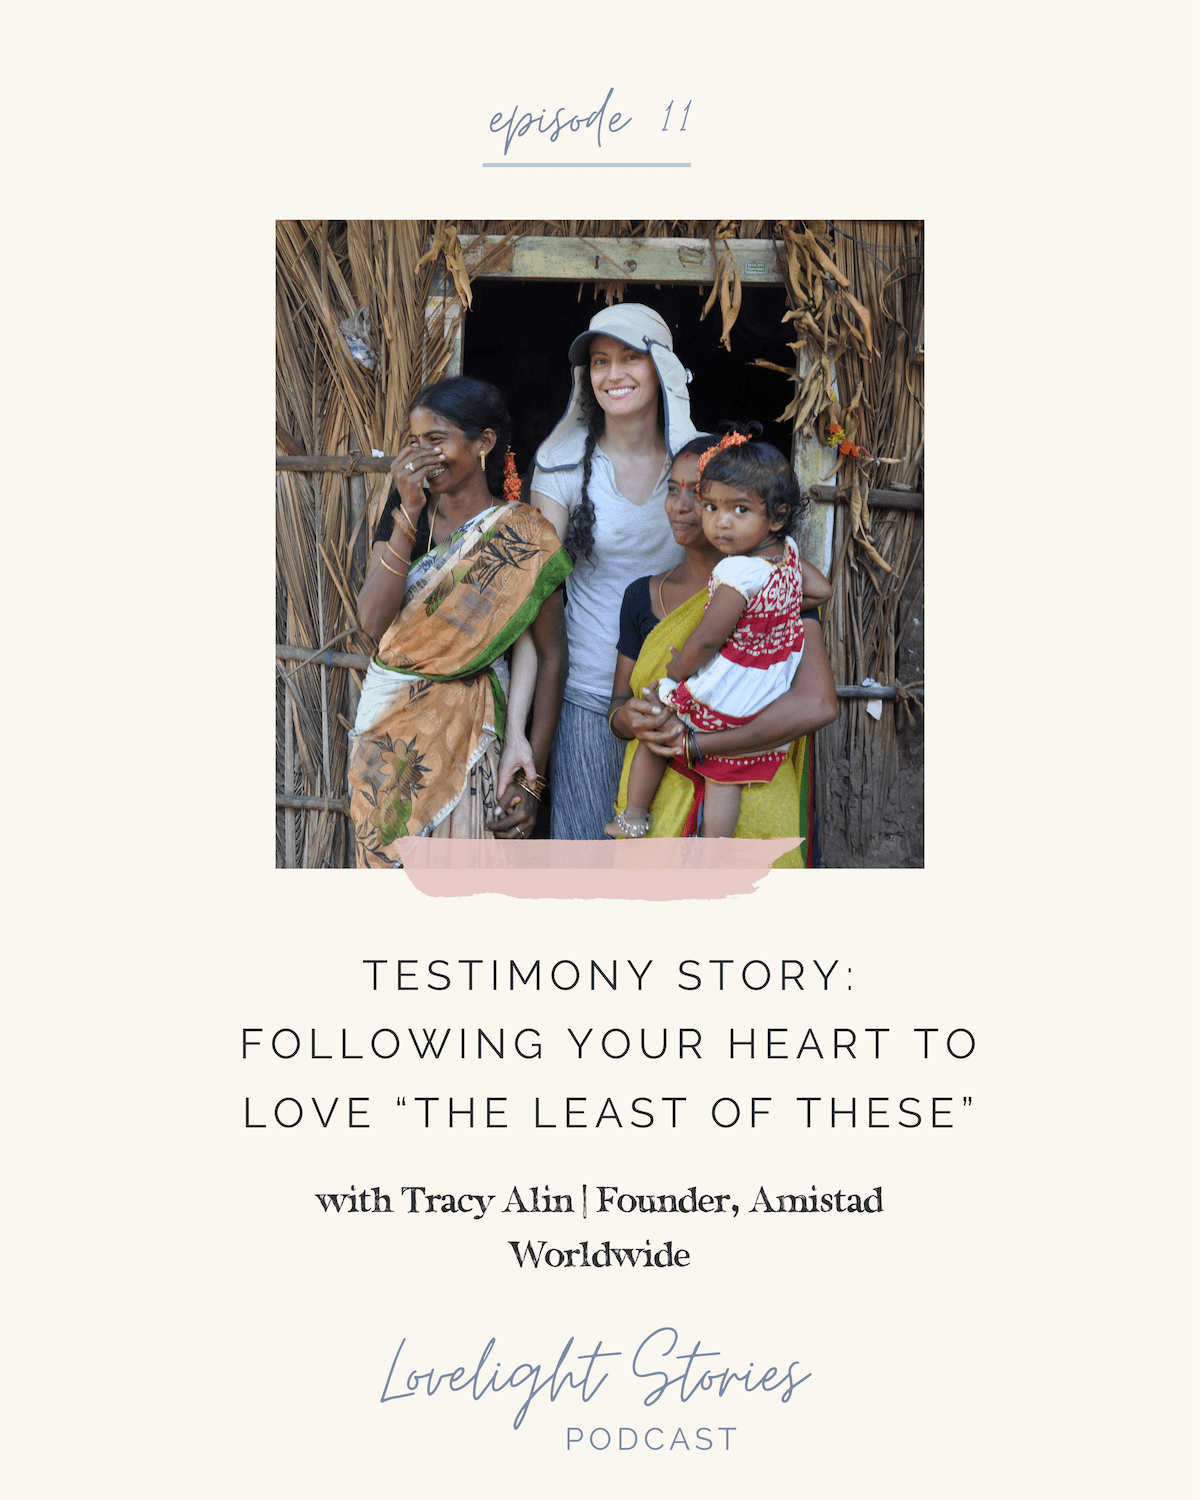 The Lovelight Stories Podcast with Tracy Alin, Founder of Amistad Worldwide